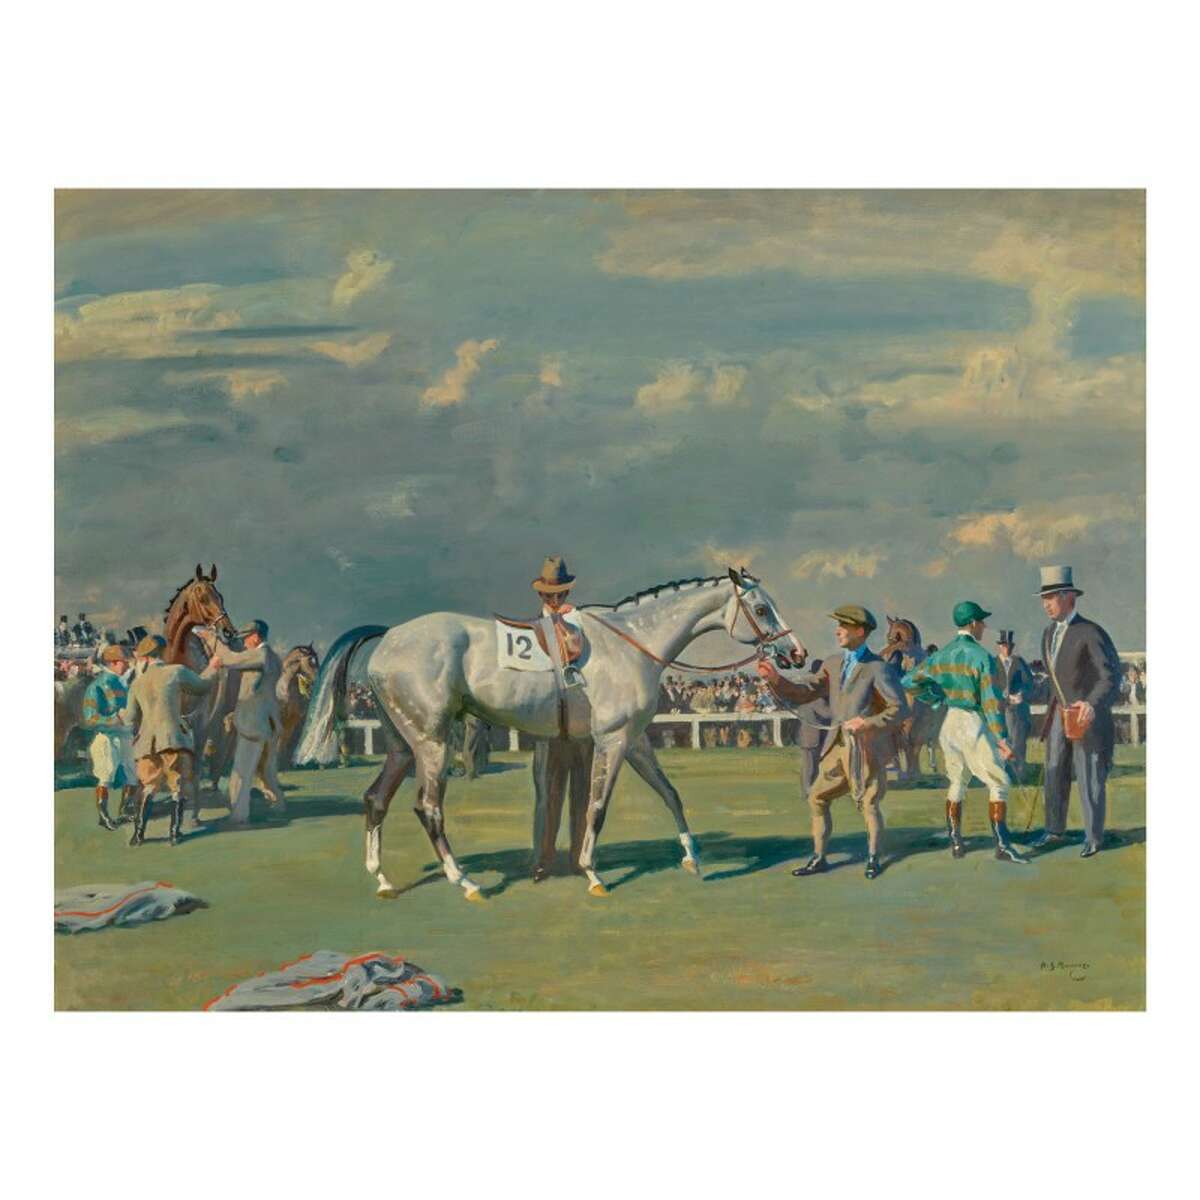 Mahmoud Being Saddled For The Derby, 1936, by Sir Alfred Munnings